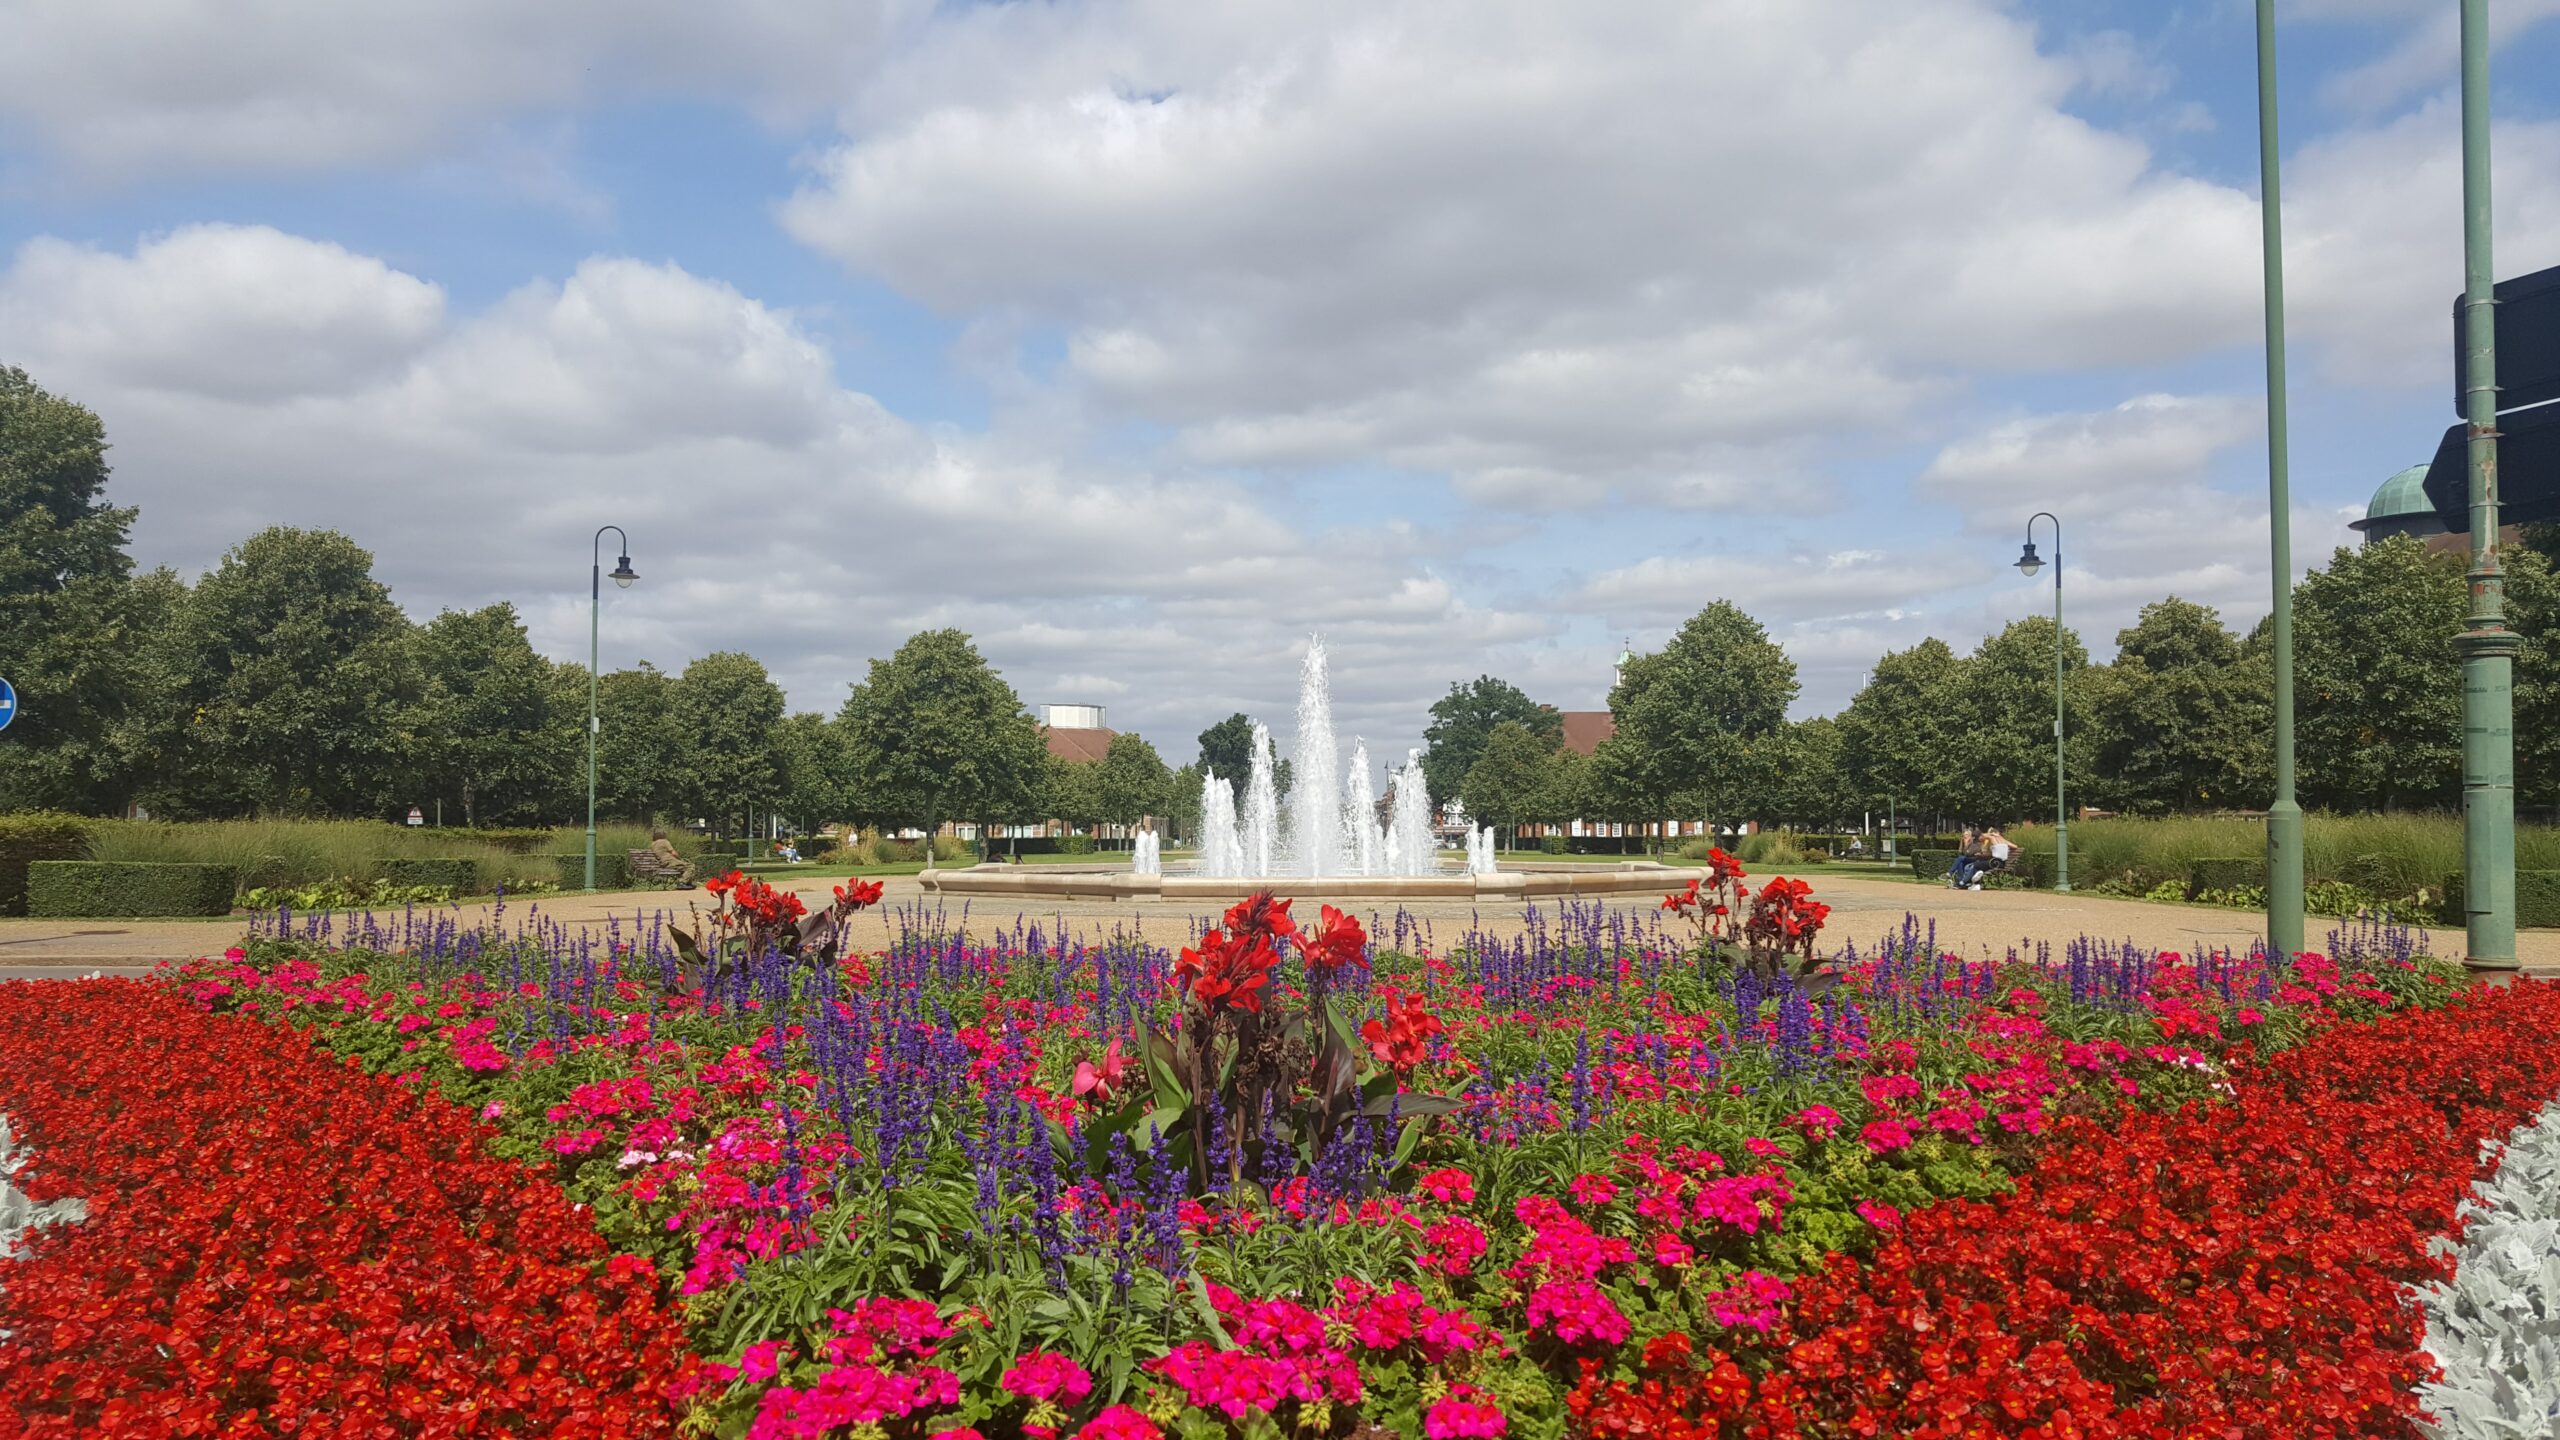 A fountain surrounded by red flowers in Letchworth.